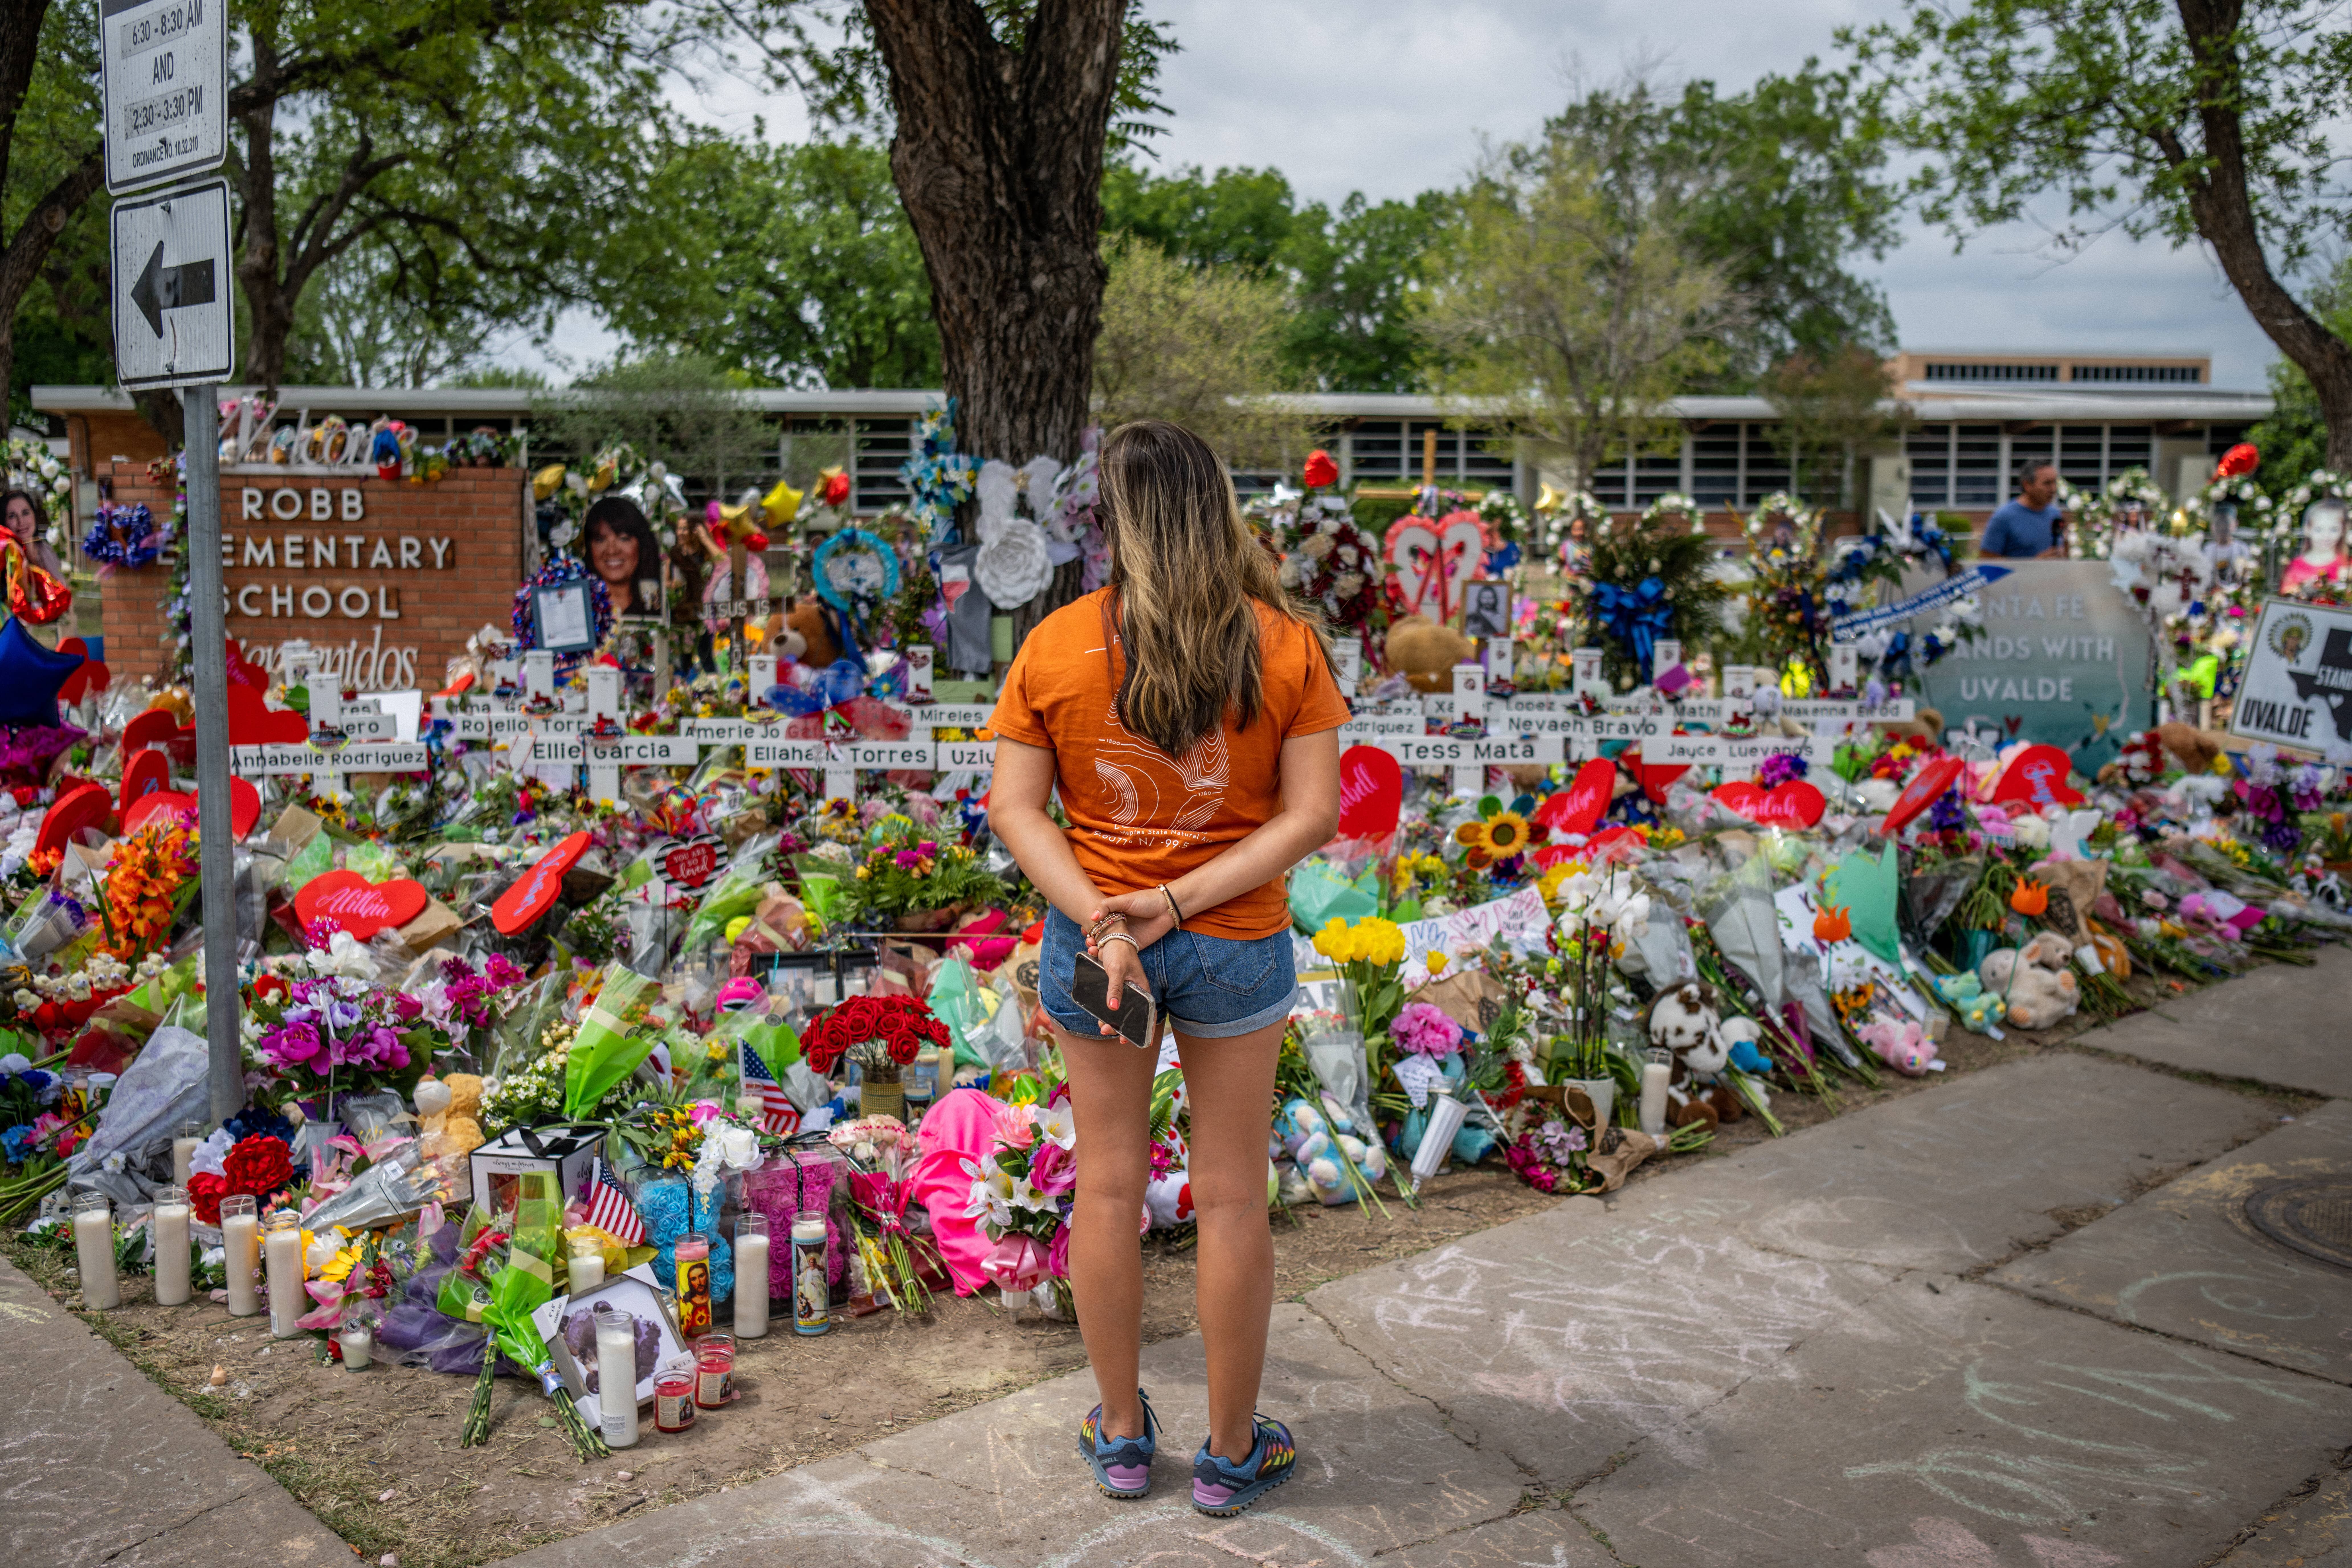 A woman stands in front of memorial dedicated to the 19 children and two adults killed on May 24 during the mass shooting at Robb Elementary School in Uvalde, Texas.